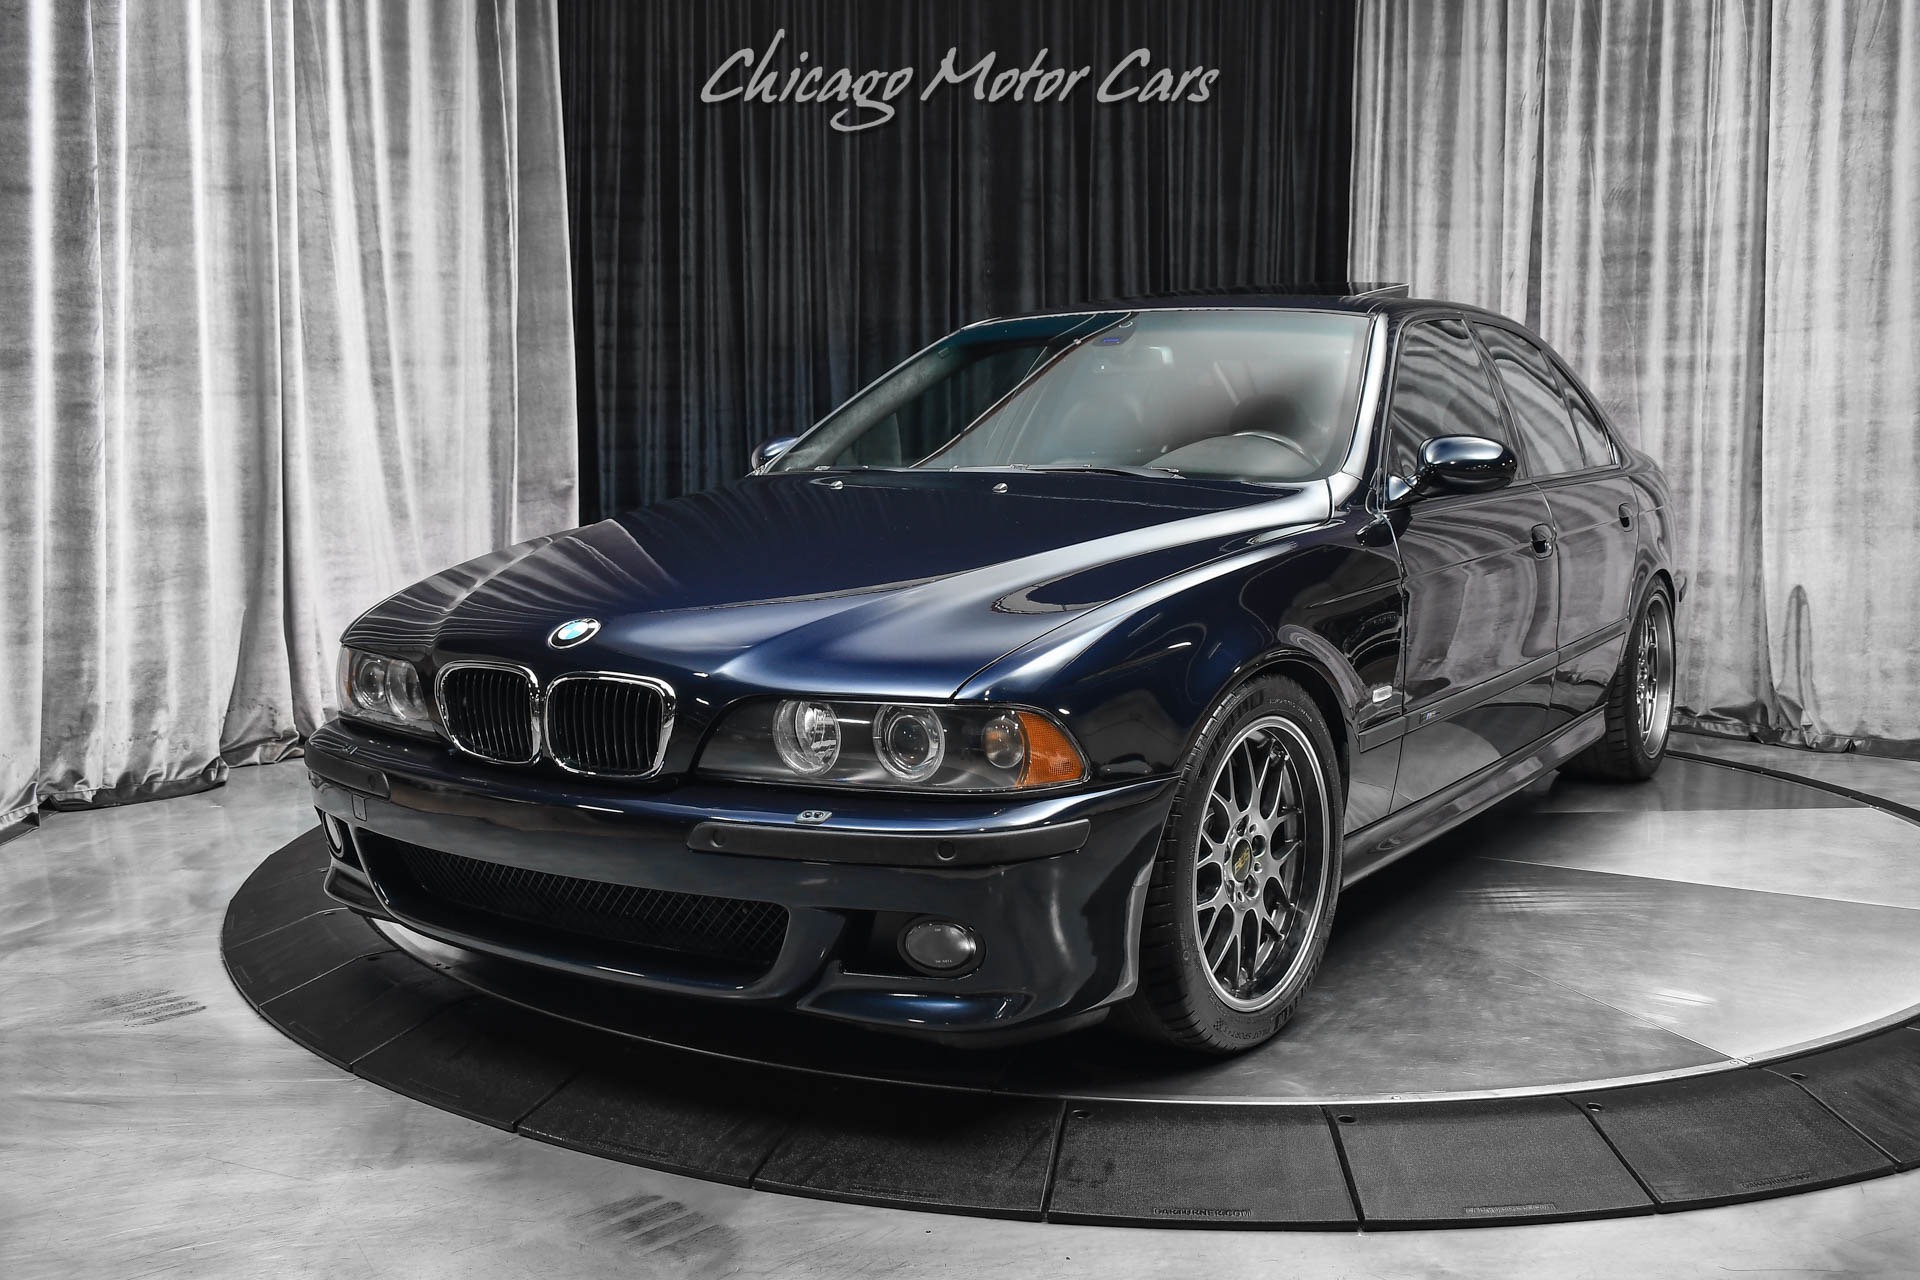 2002 BMW M5 E39 6-Speed Collectible